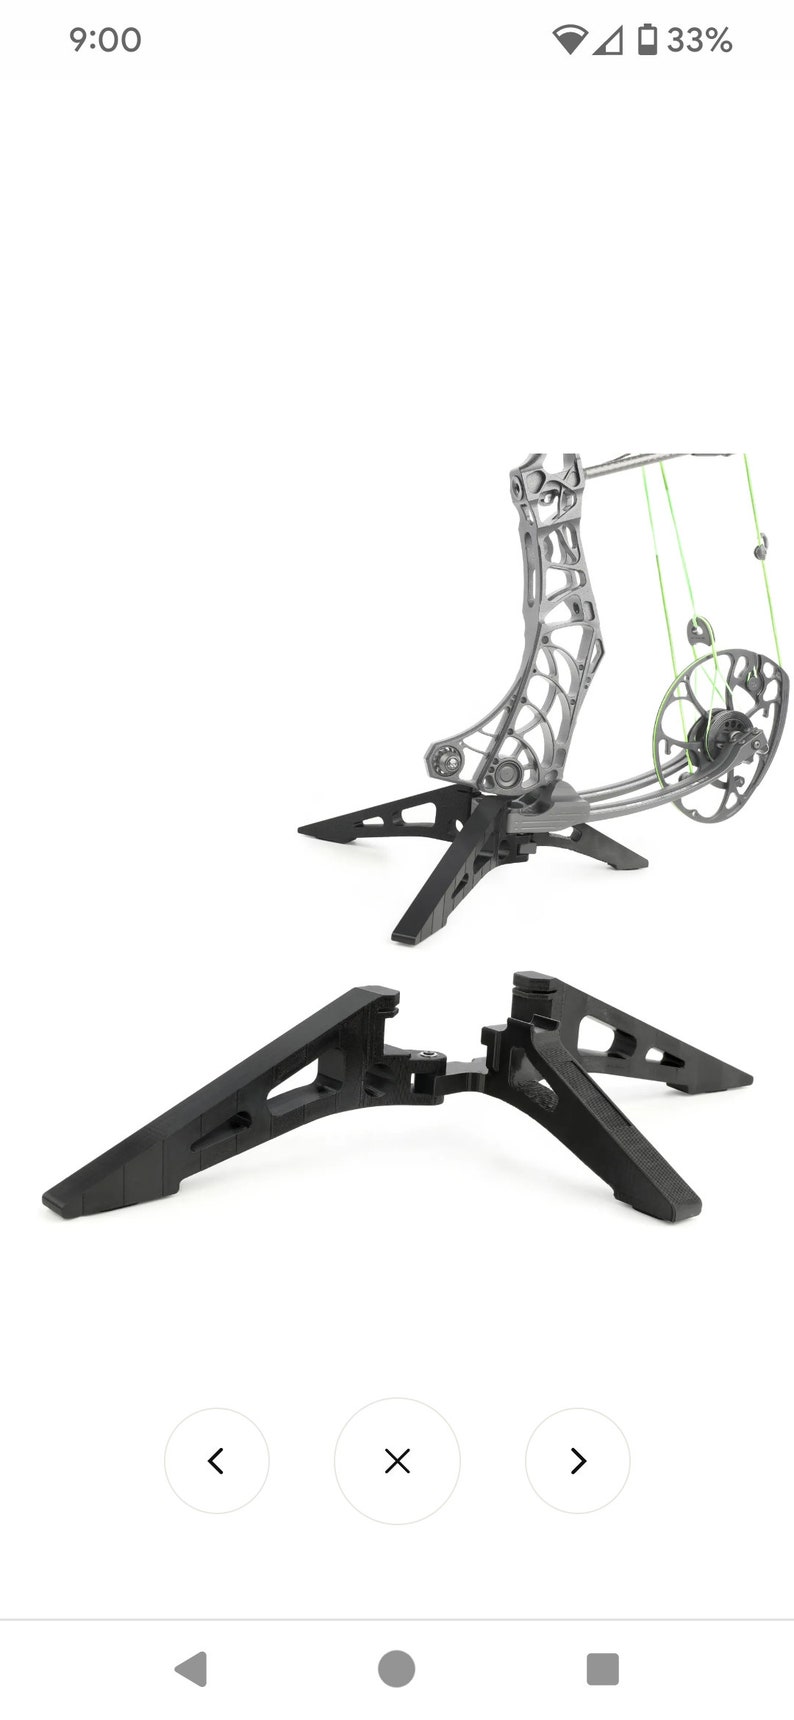 Compound Bow Engage Limb Legs for MATTHEWS compound bow image 2